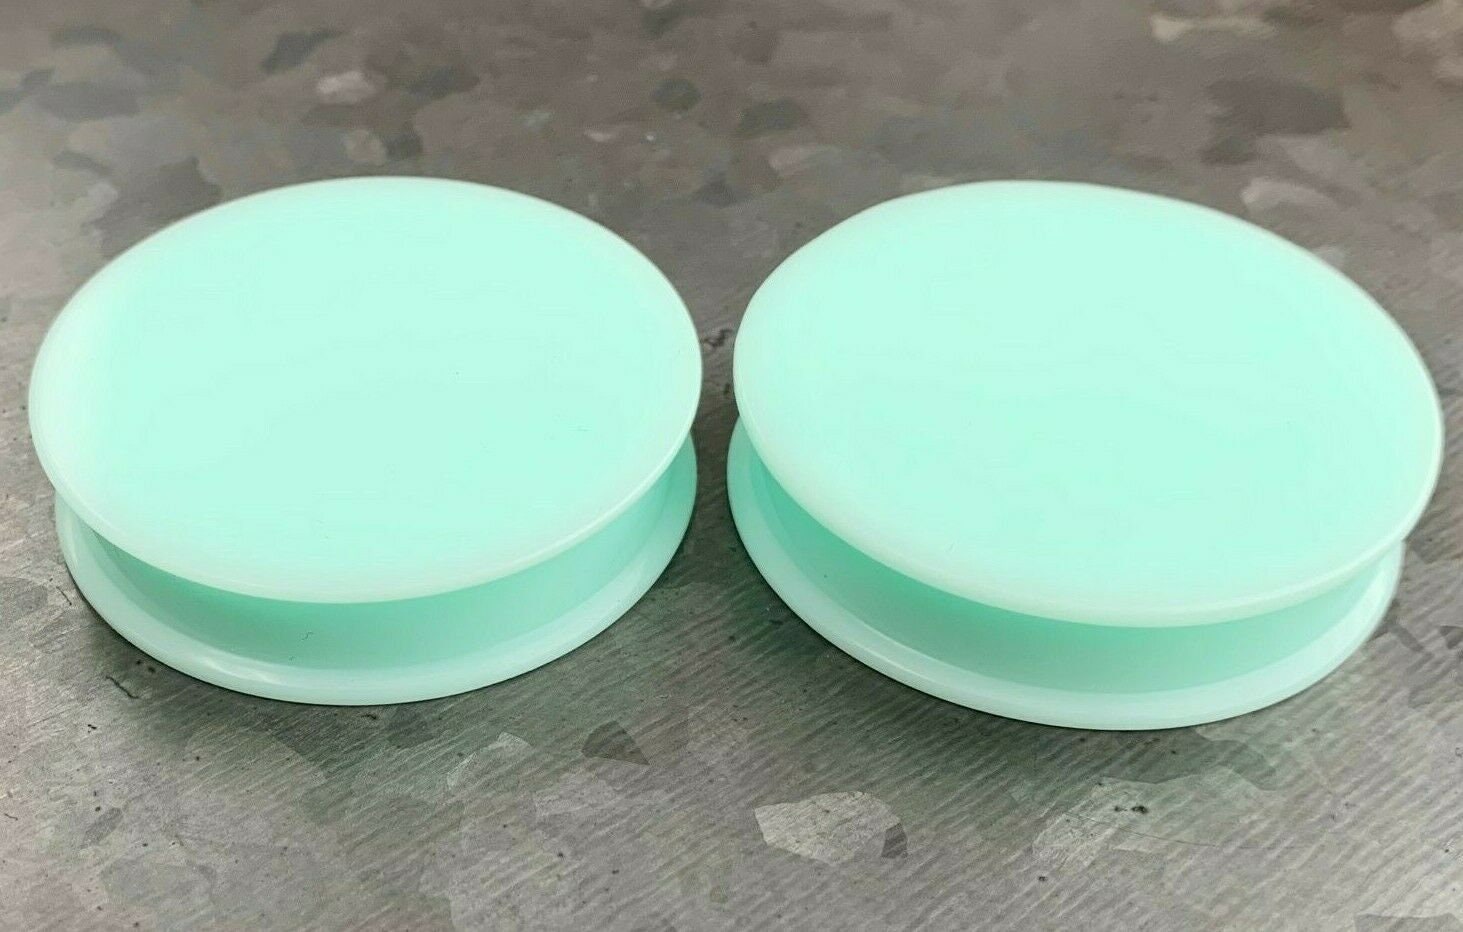 PAIR of Stunning Teal Solid Silicone Double Flare Plugs - Gauges 2g (6mm) up to 2" (51mm) available!